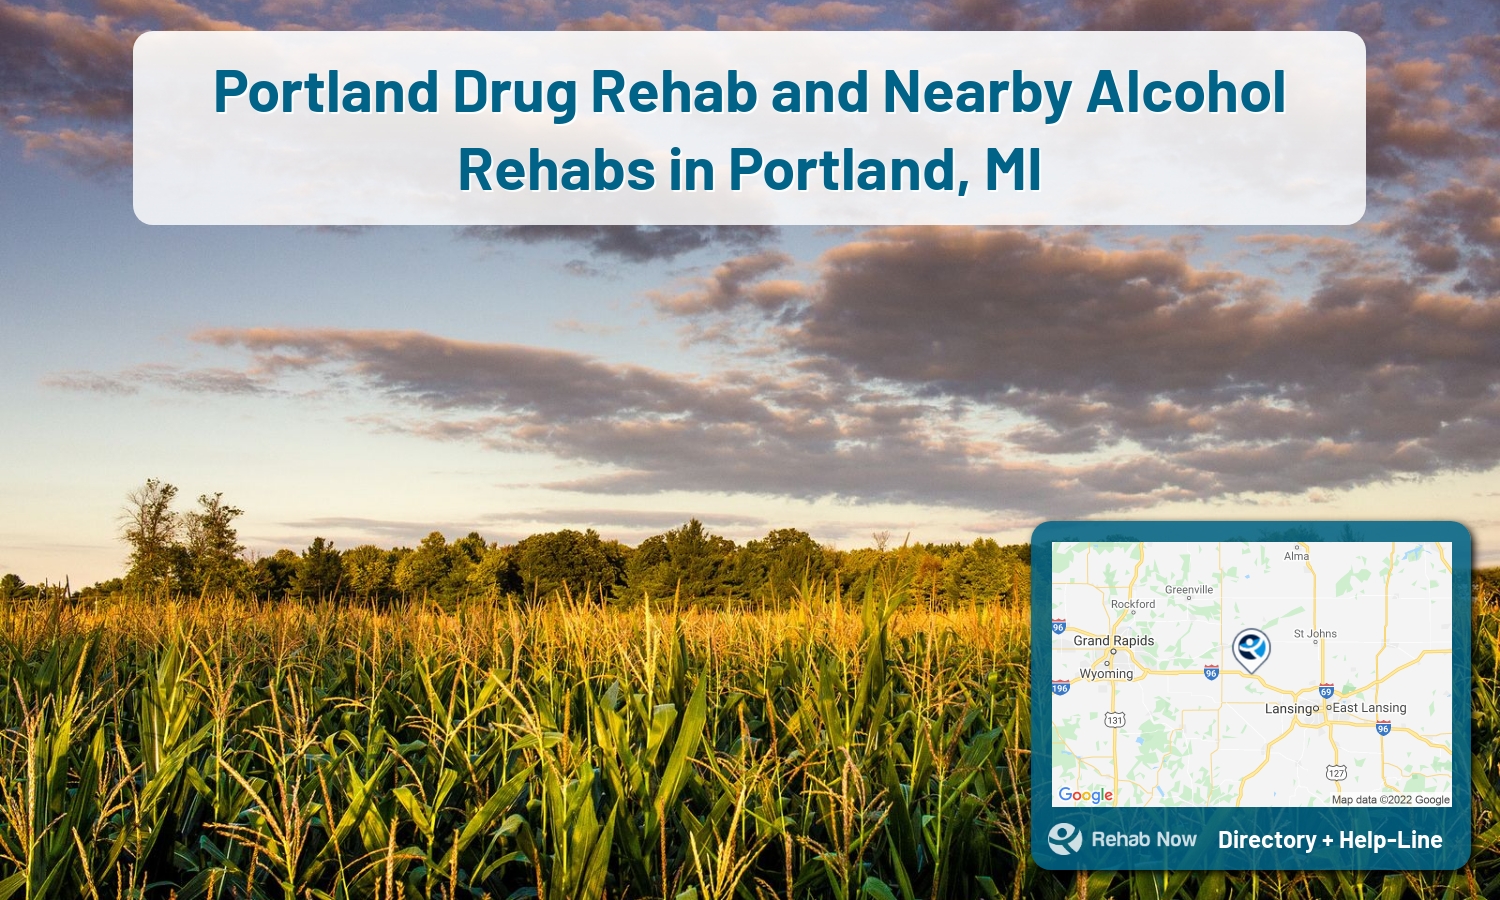 Drug rehab and alcohol treatment services nearby Portland, MI. Need help choosing a treatment program? Call our free hotline!